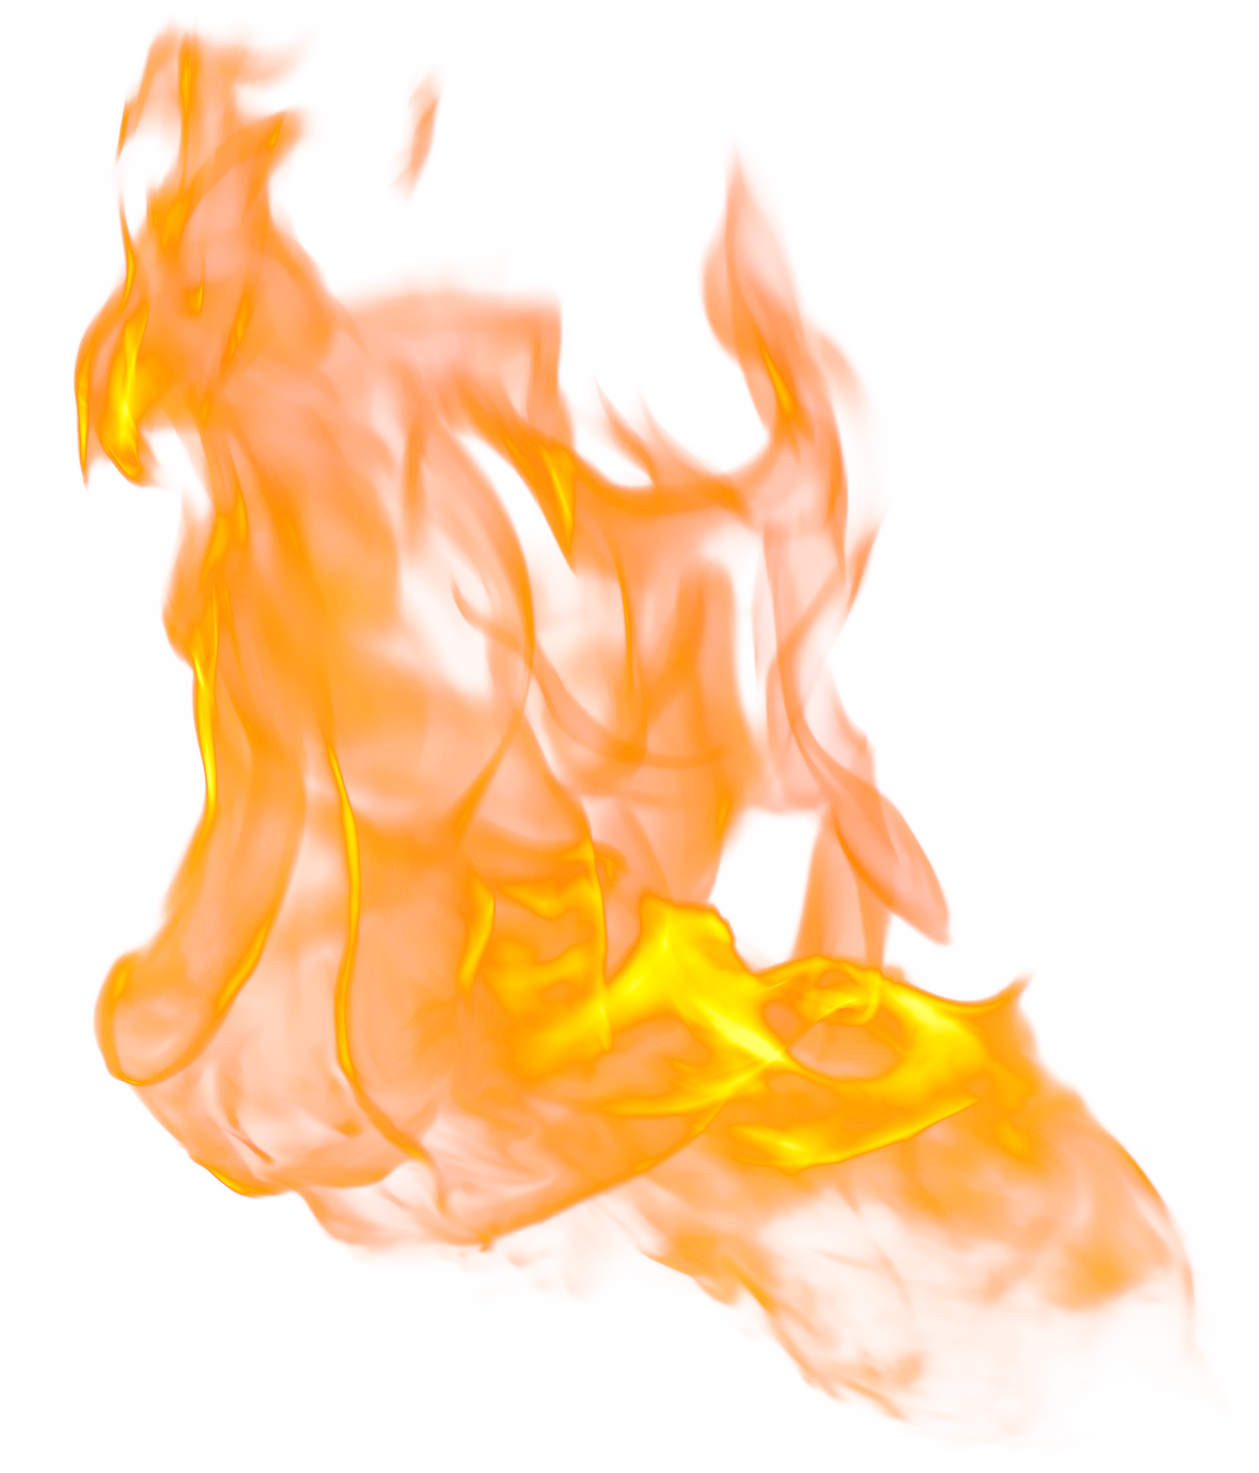 Fire Flame PNG Image. Image icon, Fire image, Fire icons